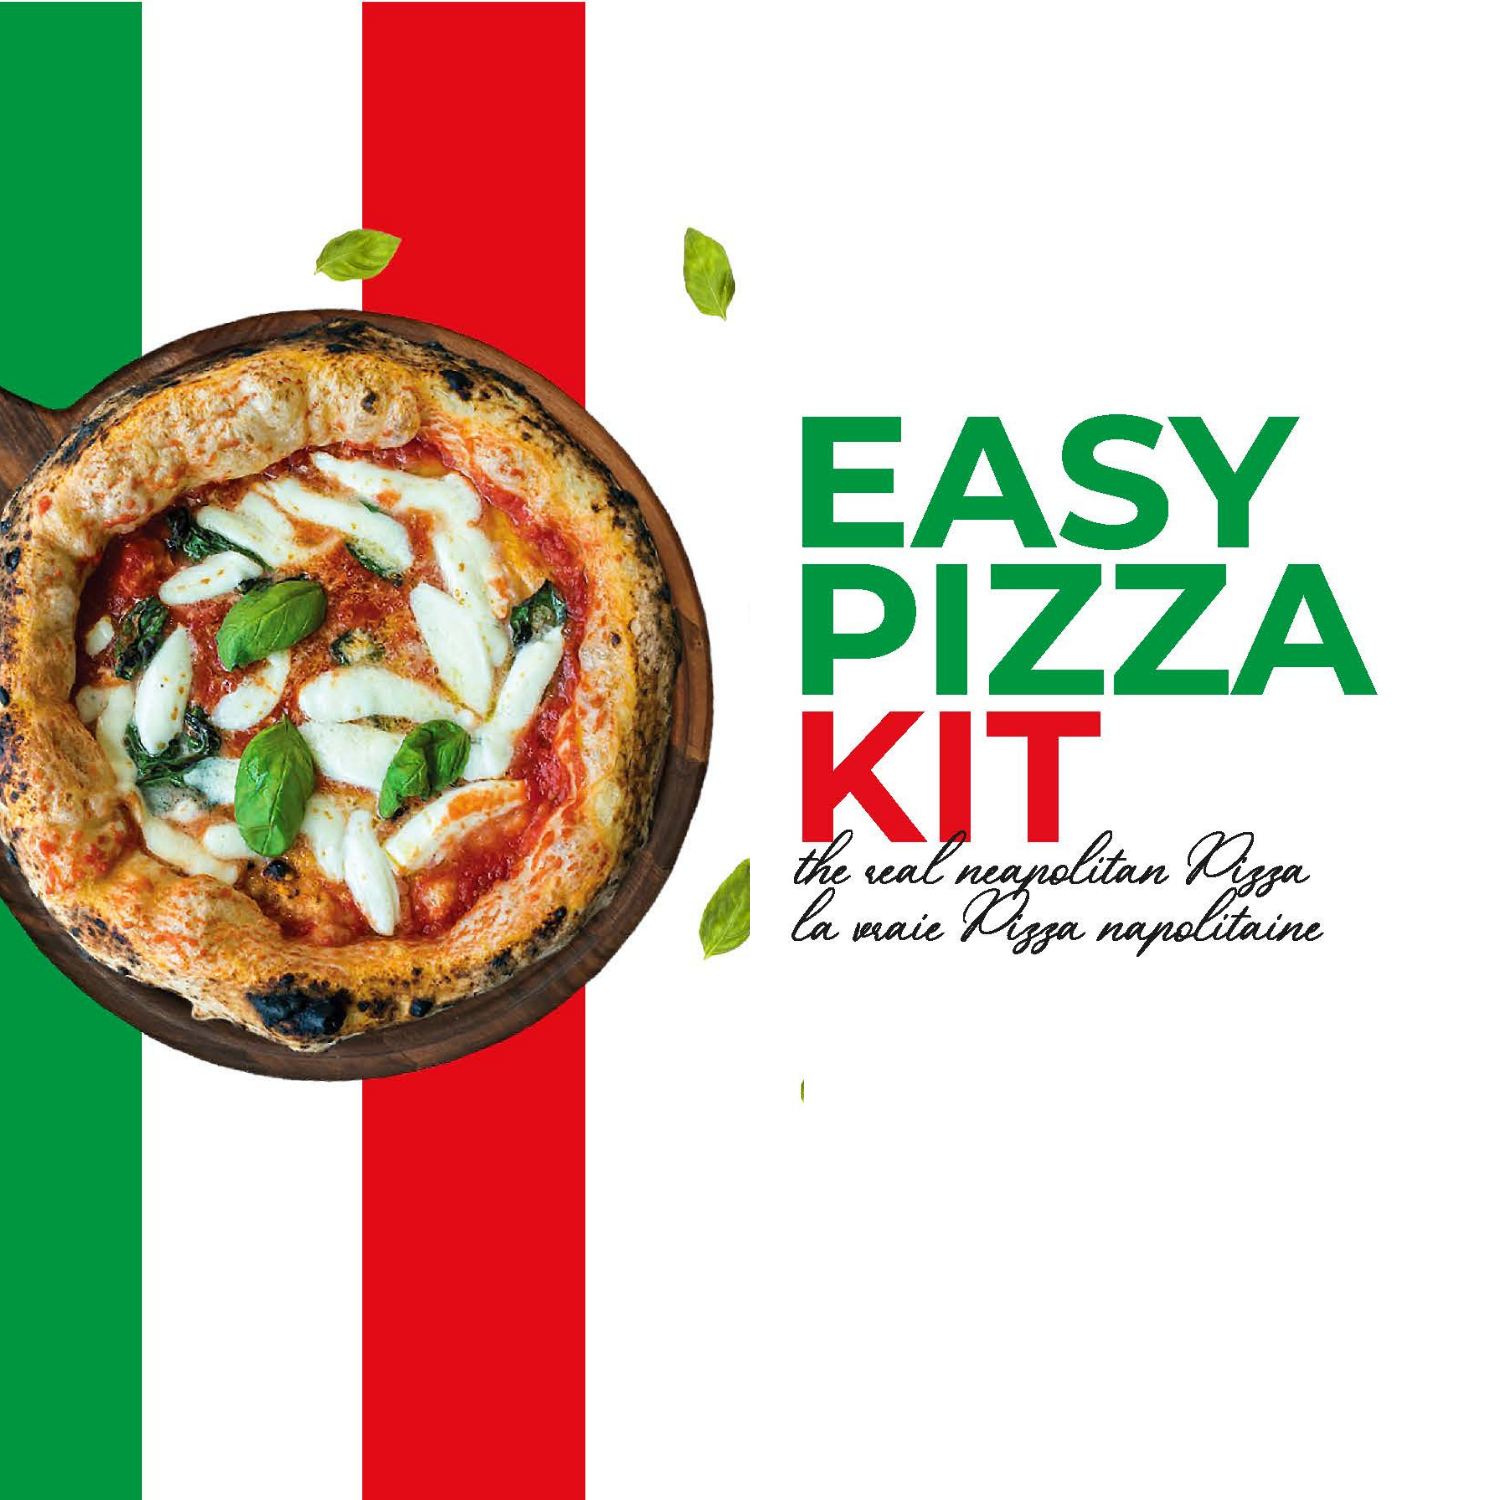 Fratelli D'Amico, Pizza Kit from Italy, authentic homemade Neapolitan Pizzas